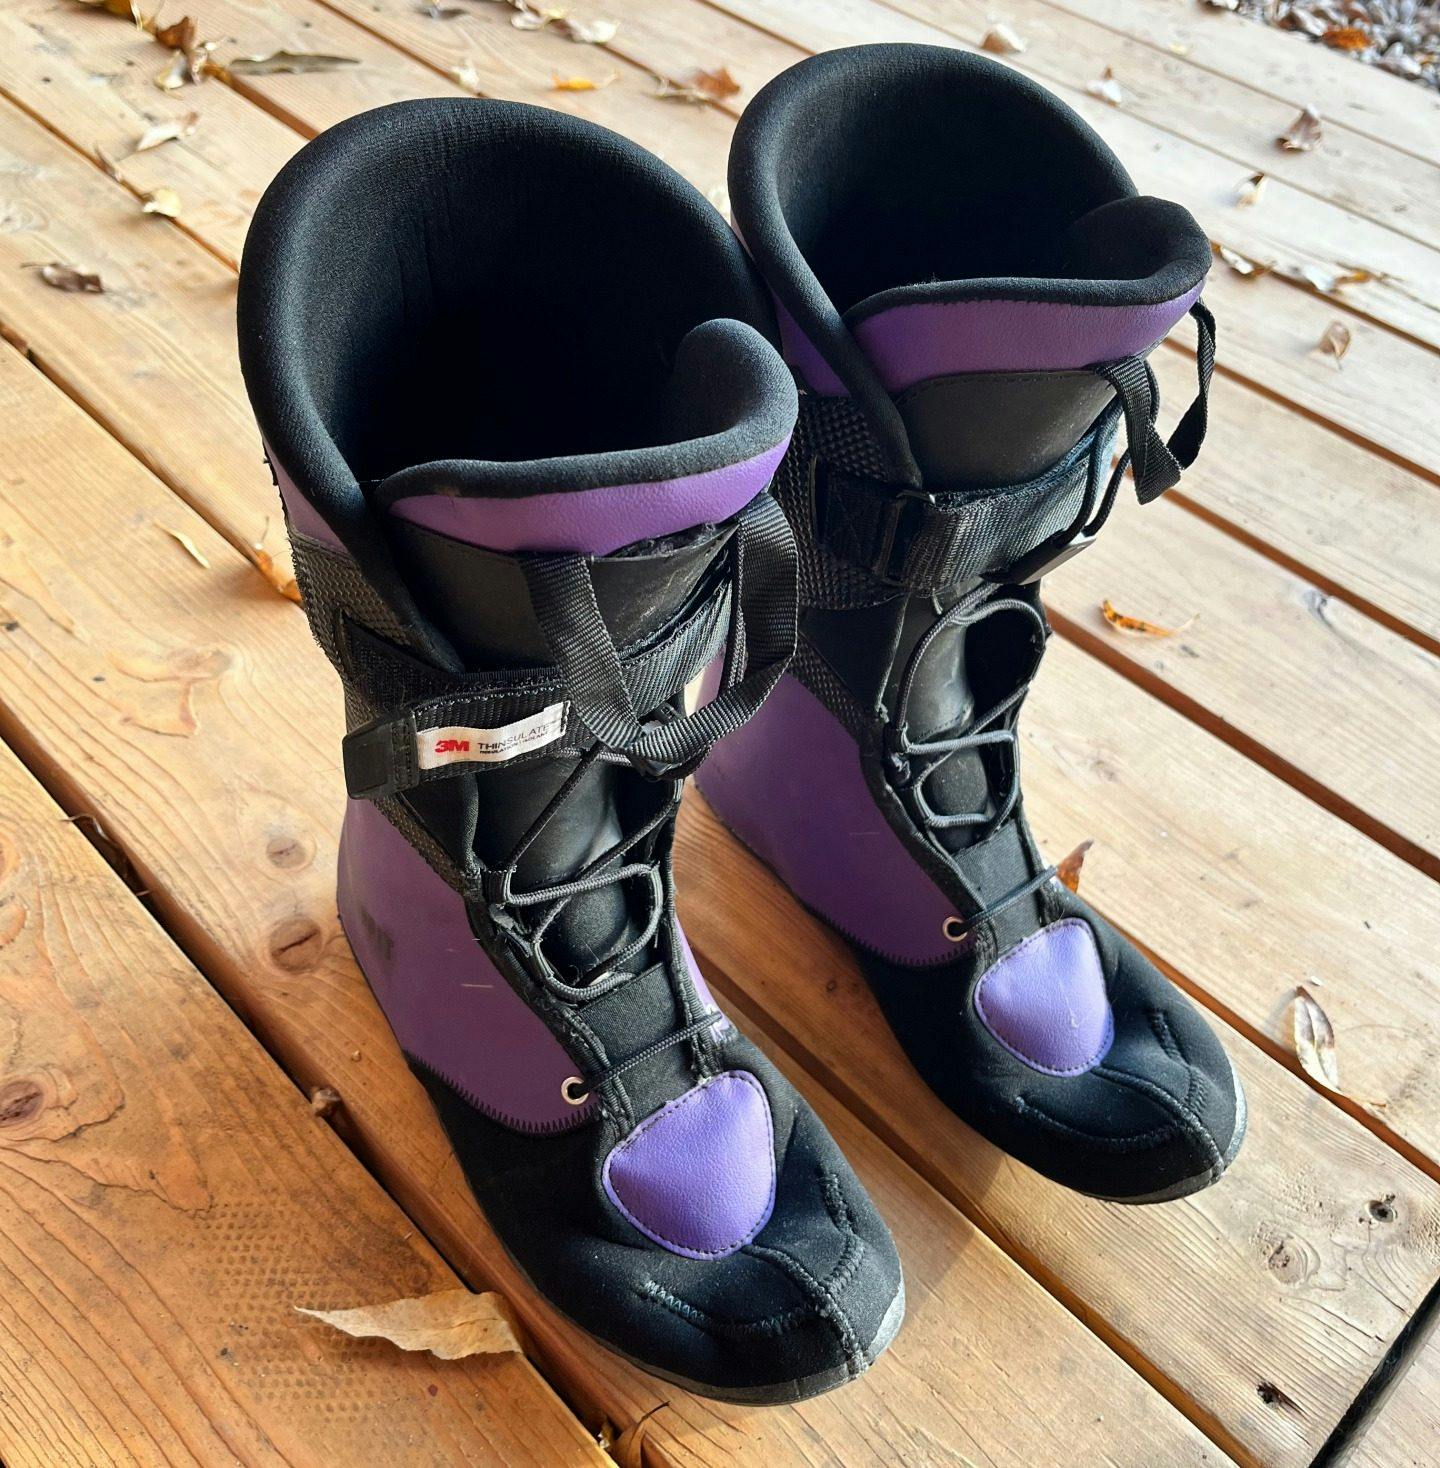 Wildsnow Reviews the GFT -- "ZipFit GFT Touring Liner Review"